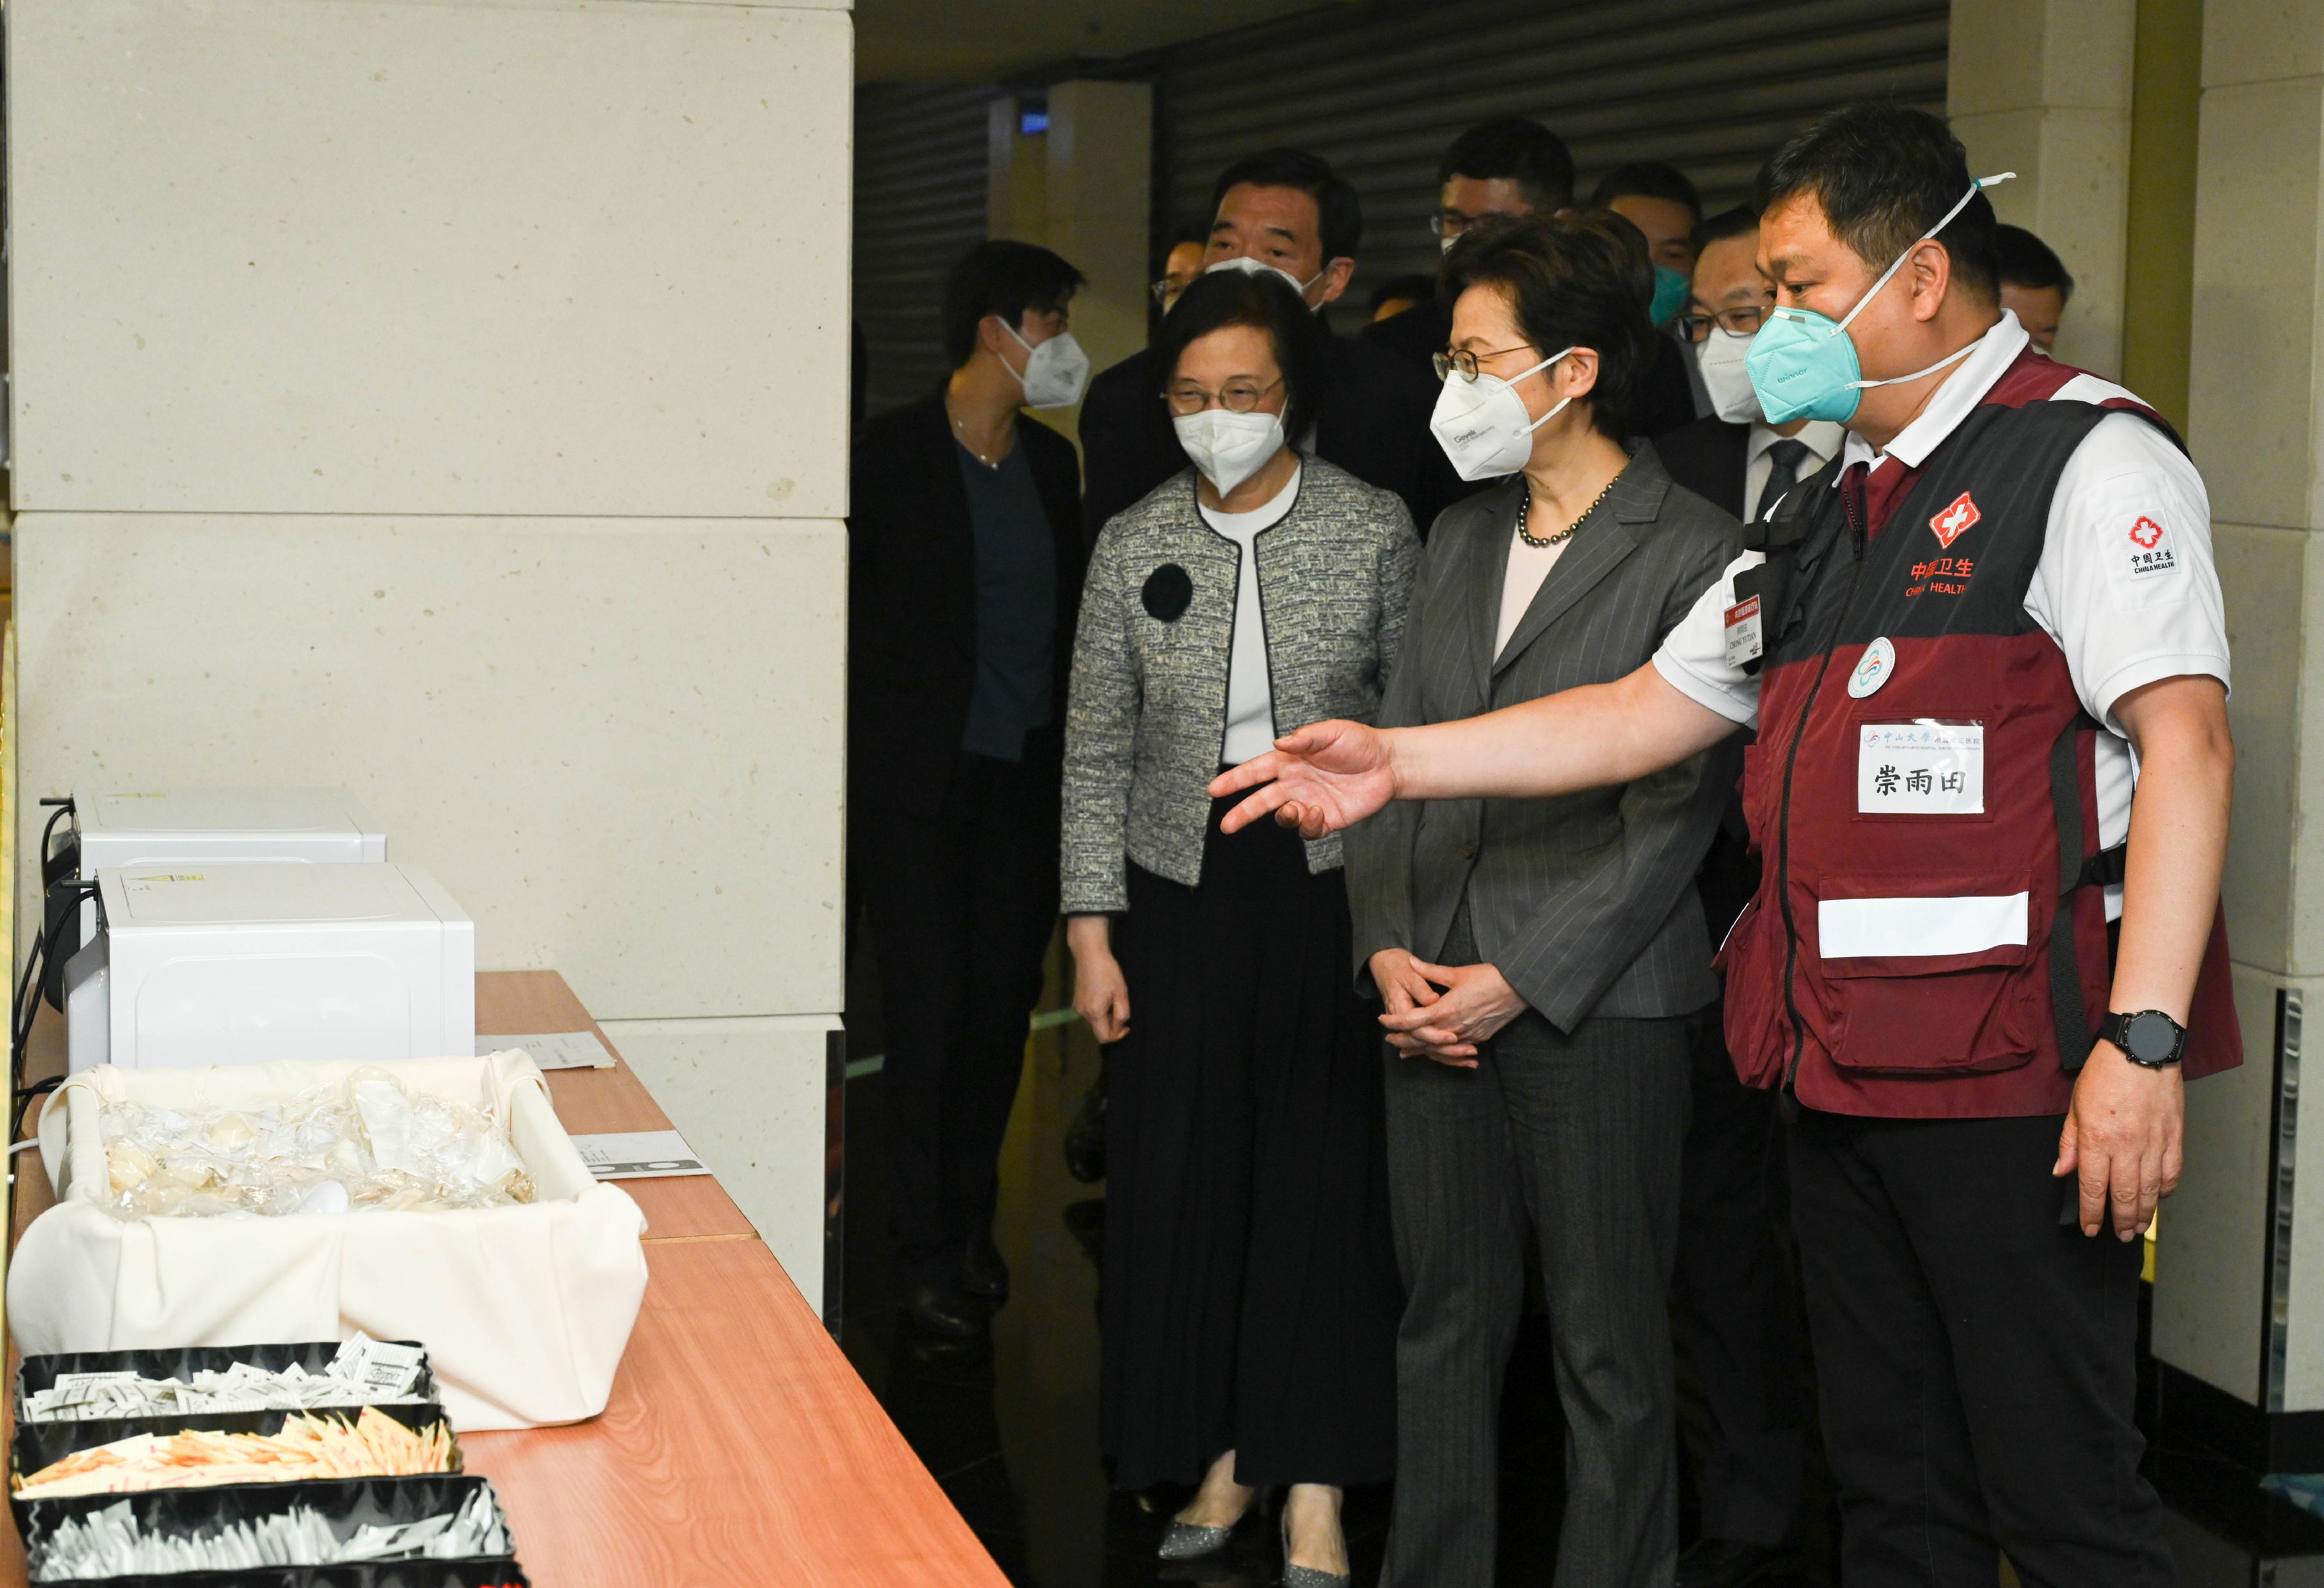 The Chief Executive, Mrs Carrie Lam, attended the appreciation and farewell ceremony held by the Hong Kong Special Administrative Region Government for the Mainland medical support team this afternoon (May 5). Photo shows Mrs Lam (centre) being briefed by the leader of the Mainland medical support team, Professor Chong Yutian (right), on the closed-loop arrangement in the hotel. Looking on is the Secretary for Food and Health, Professor Sophia Chan (left).